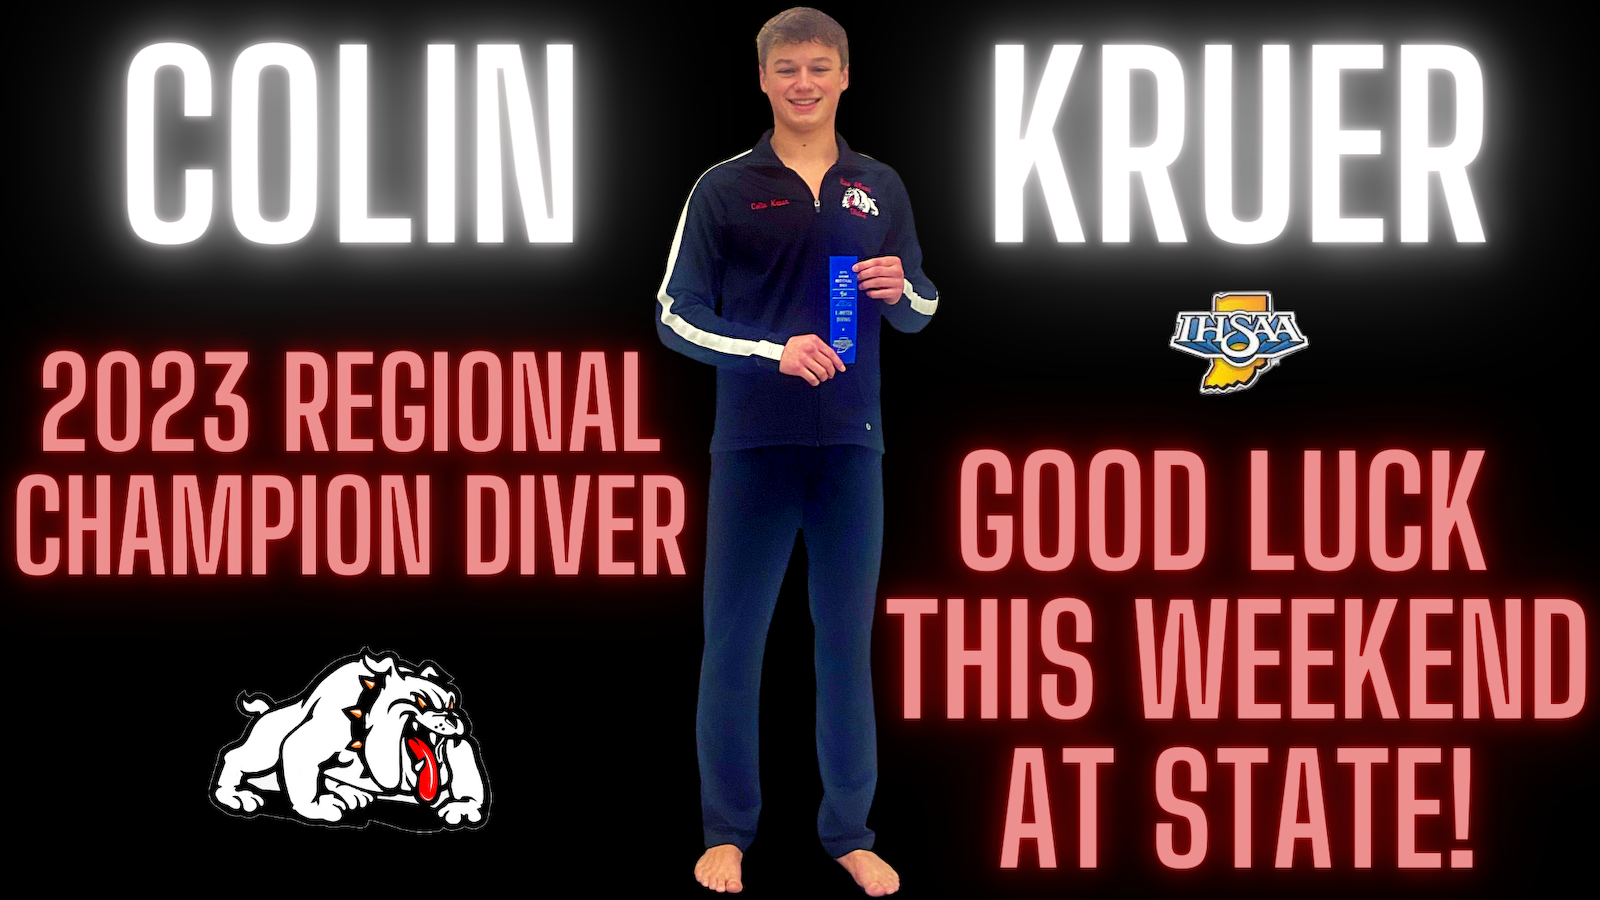 Colin Kruer advances to State for Diving cover photo